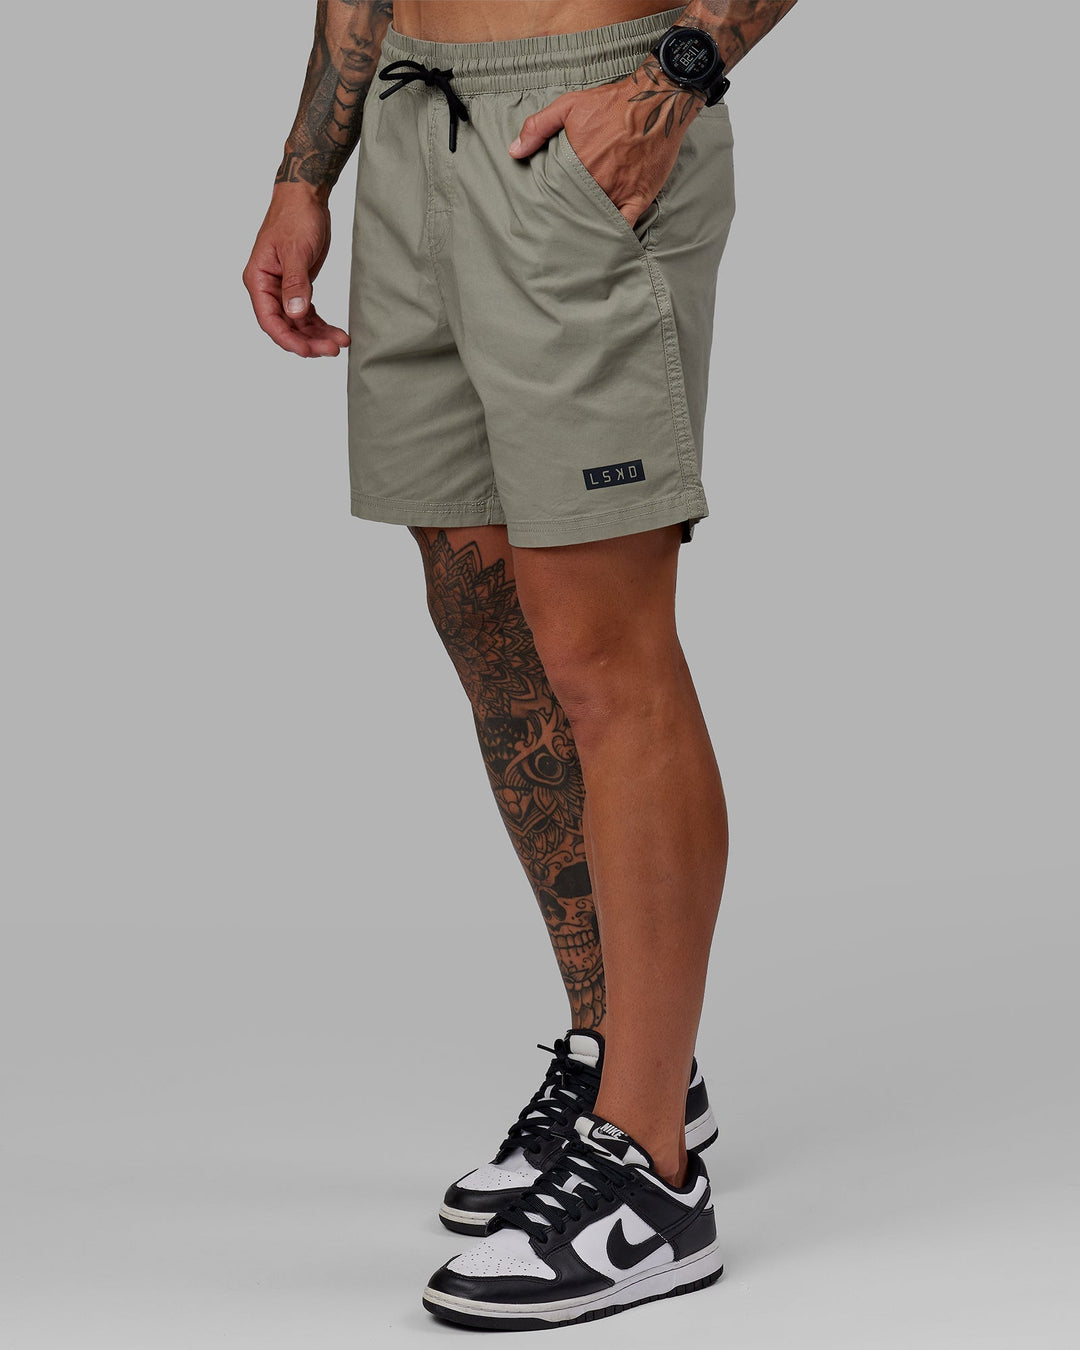 Man wearing Daily Short - Dusty Olive